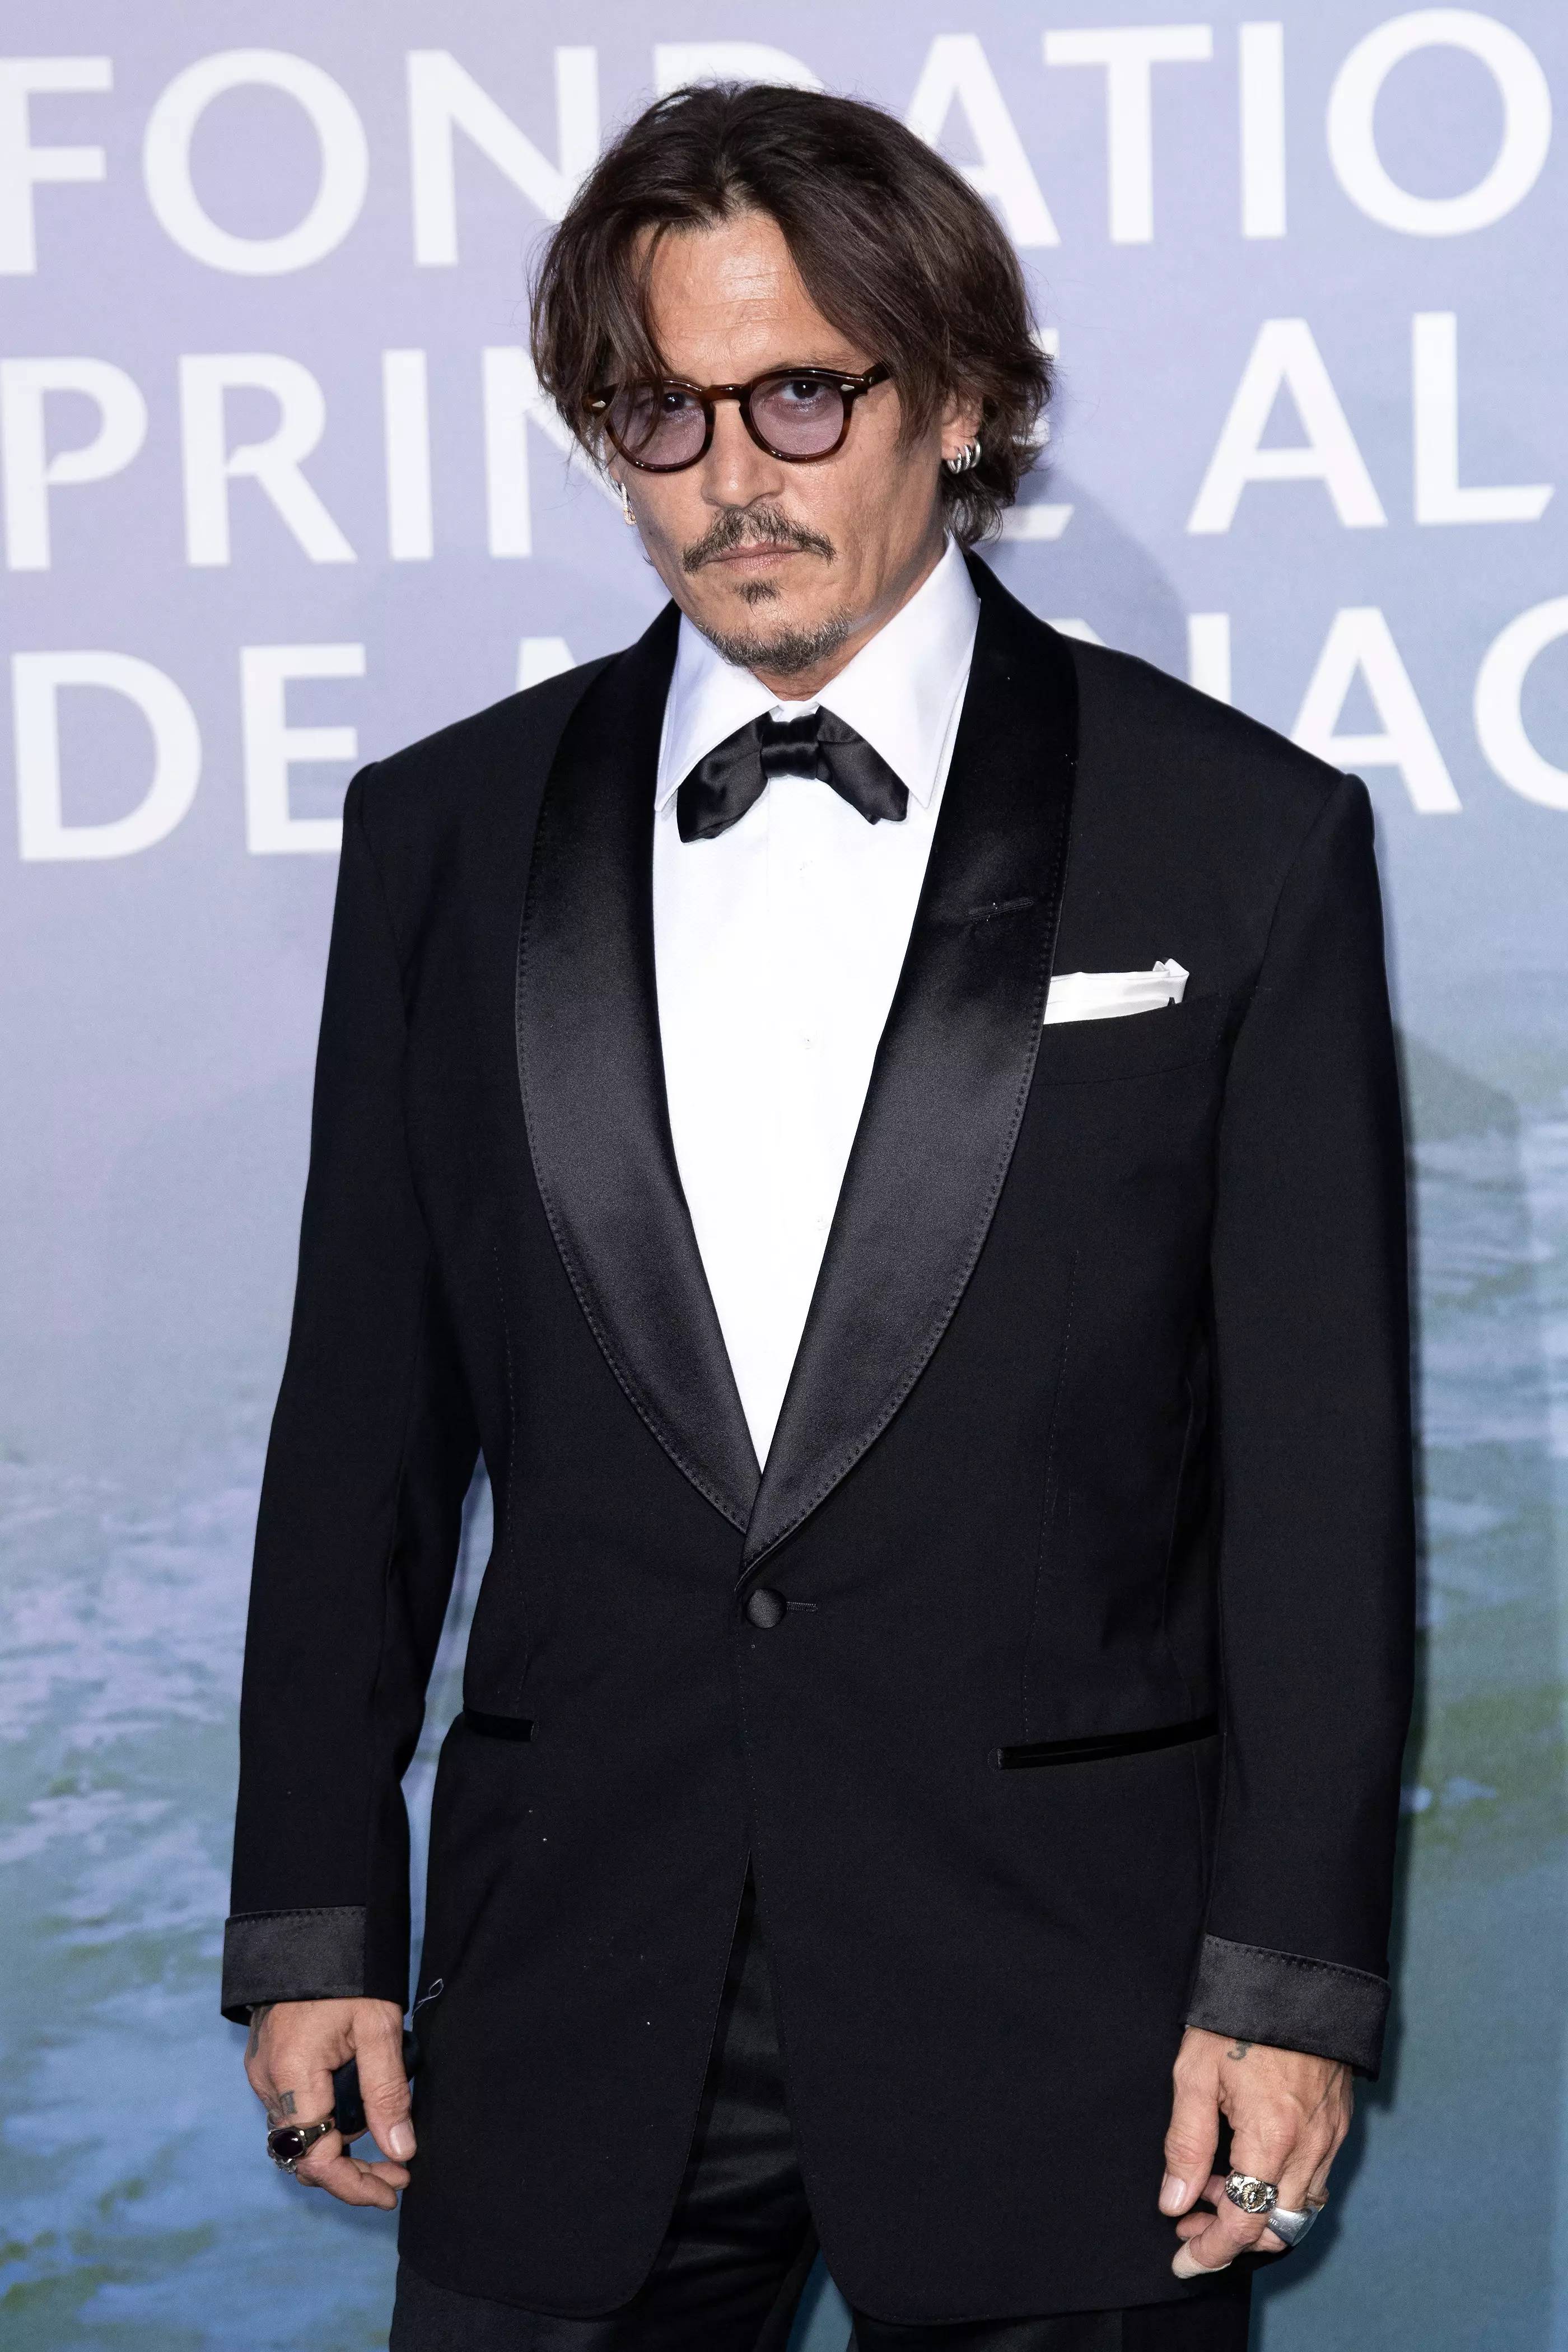 Depp was asked to step down from the upcoming Fantastic Beasts film.